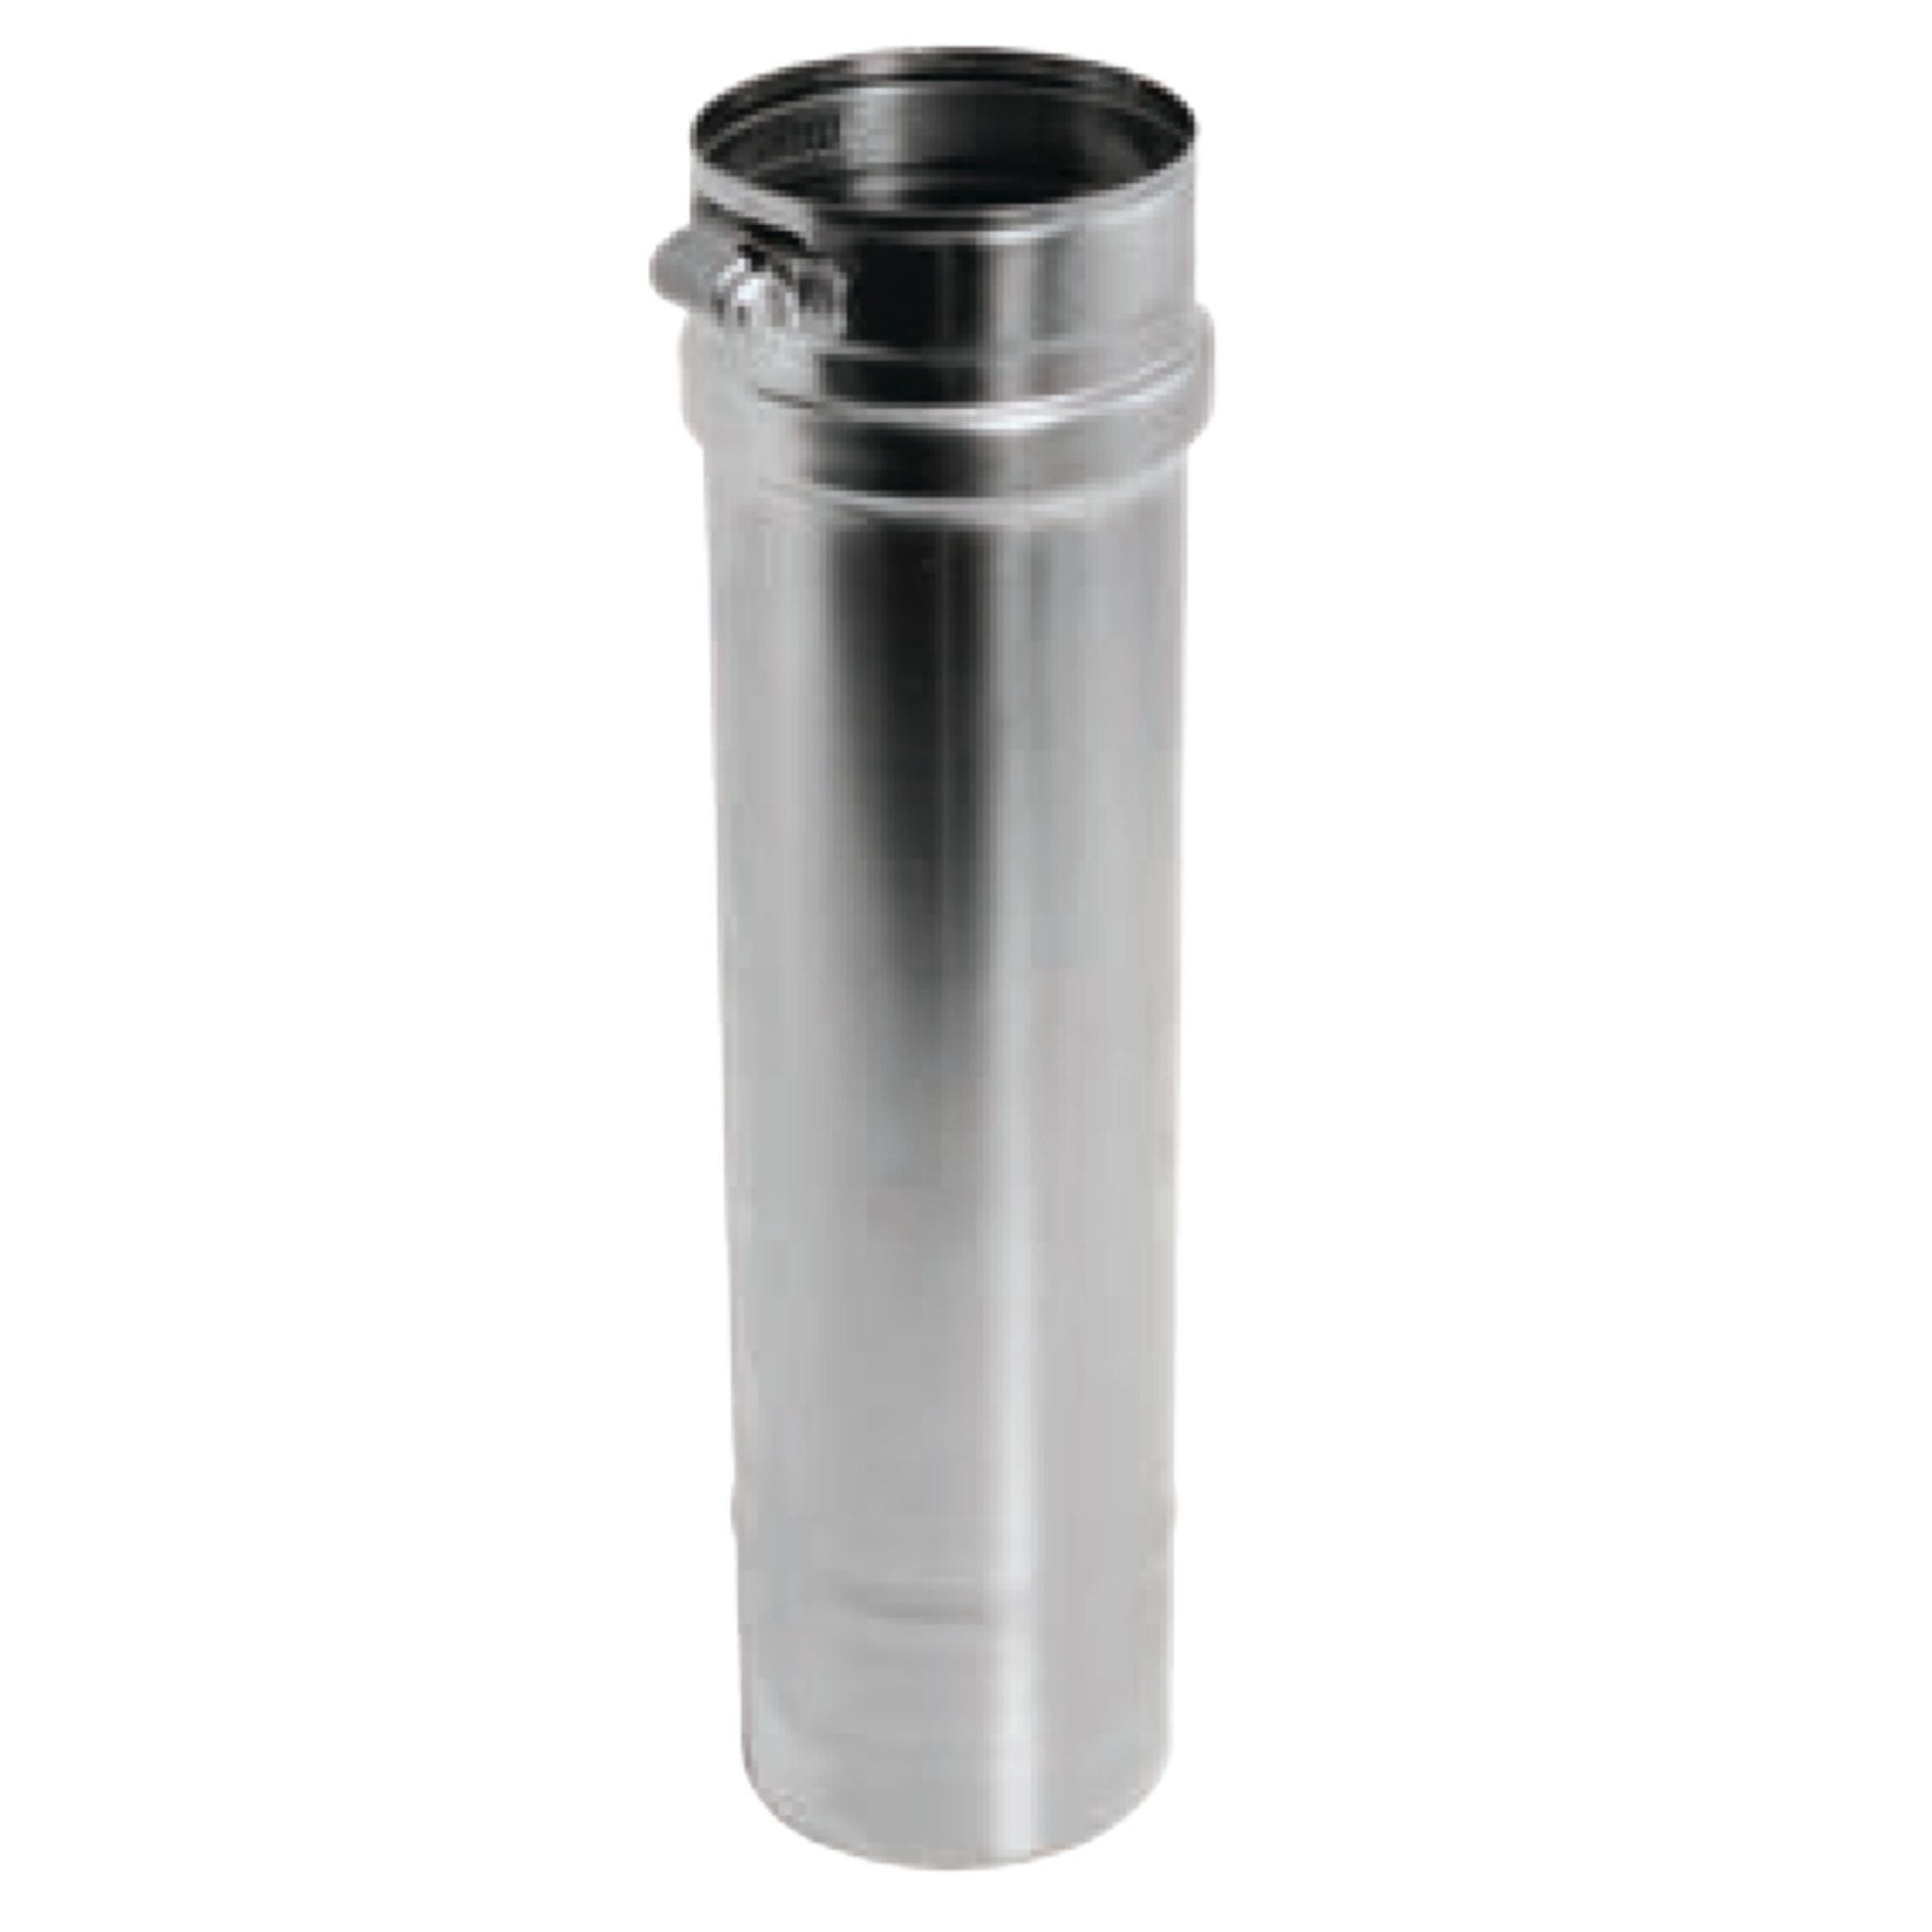 DuraVent FasNSeal 7" x 48" 316L Stainless Steel Vent Length